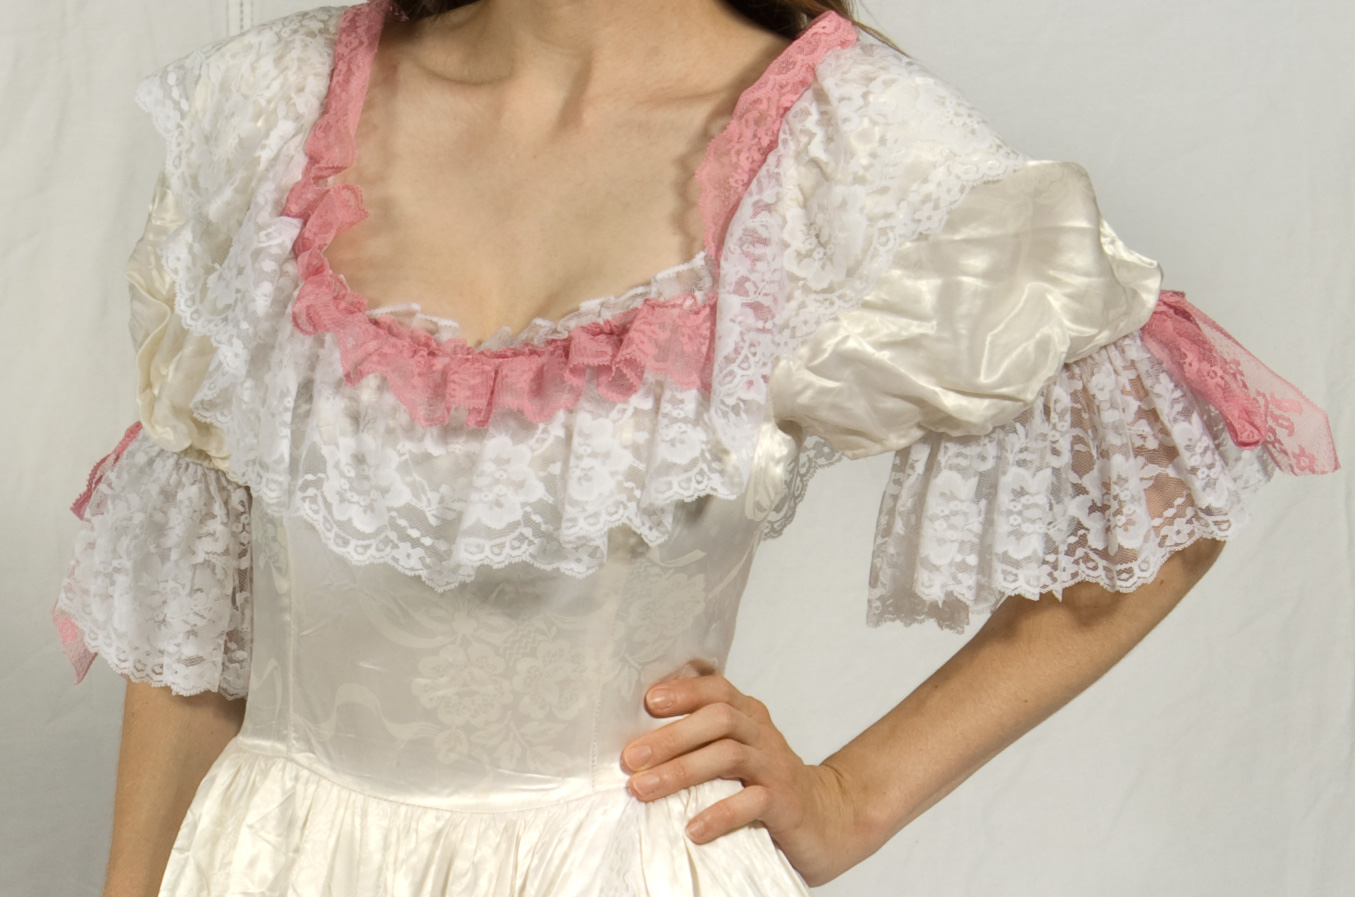 Southern Belle Costume